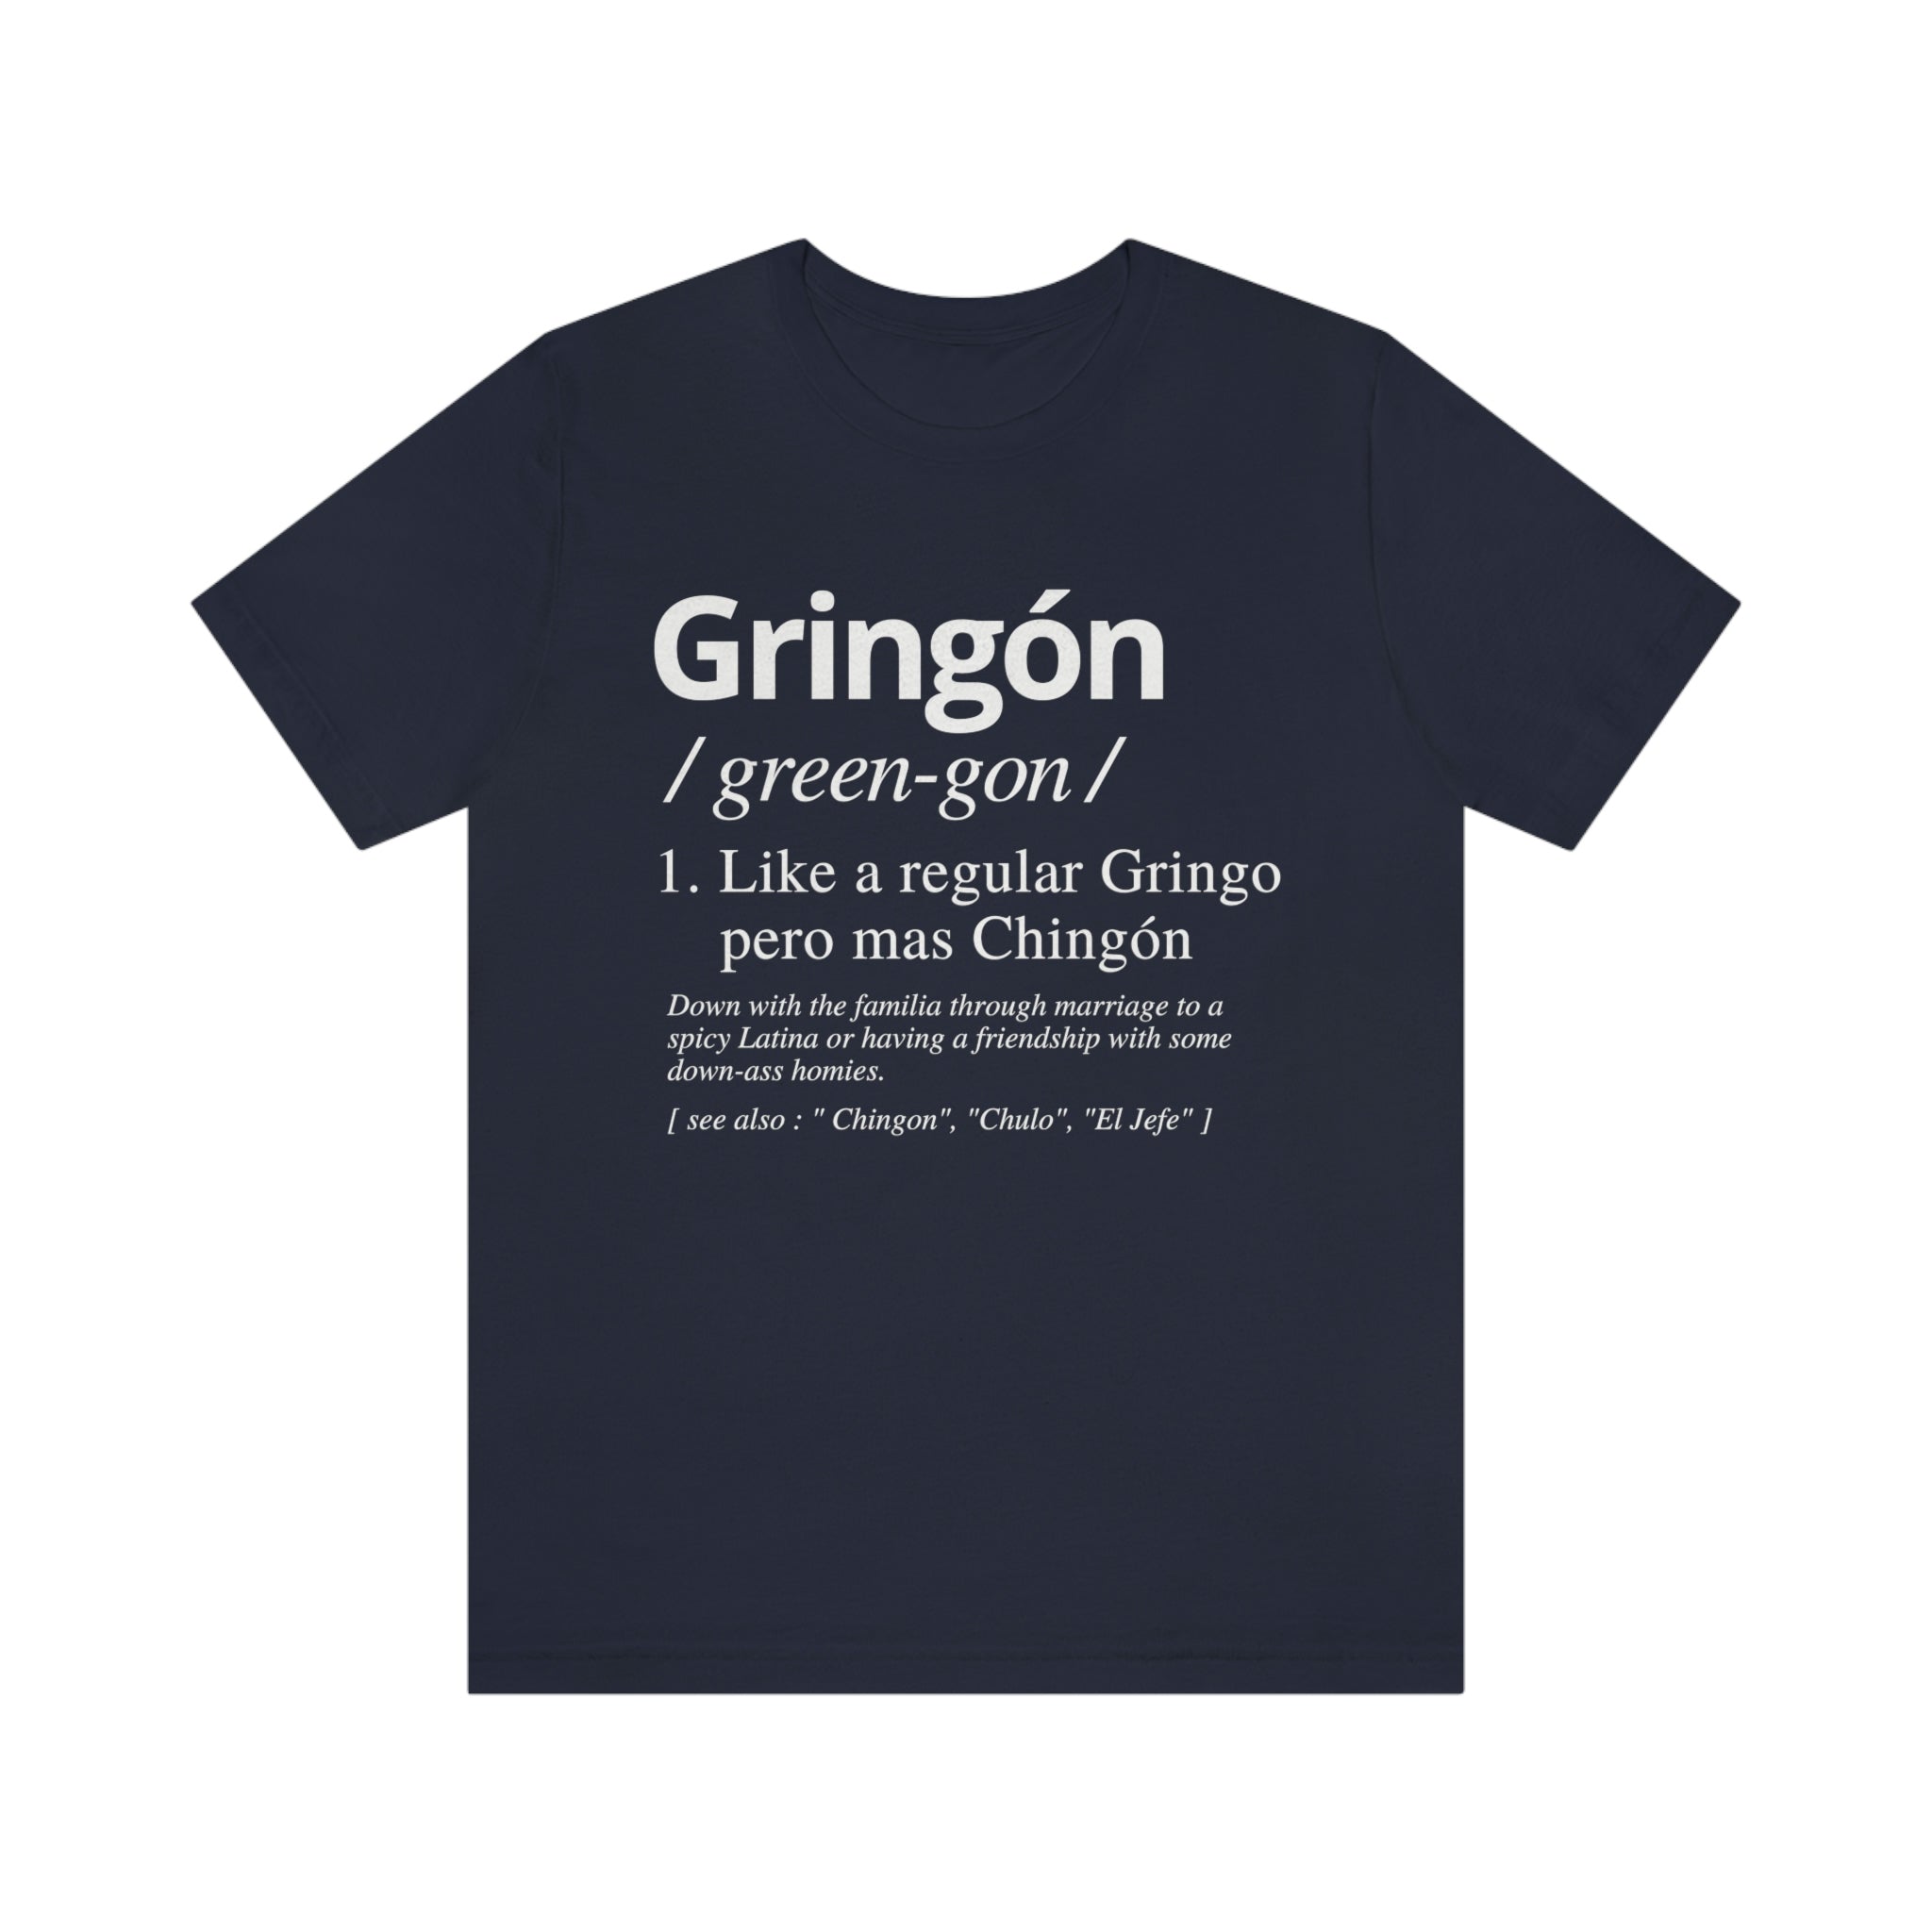 blue Men's t-shirt with "Gringon" defined as a gringo that has become cooler through a Latin spouse or close friends